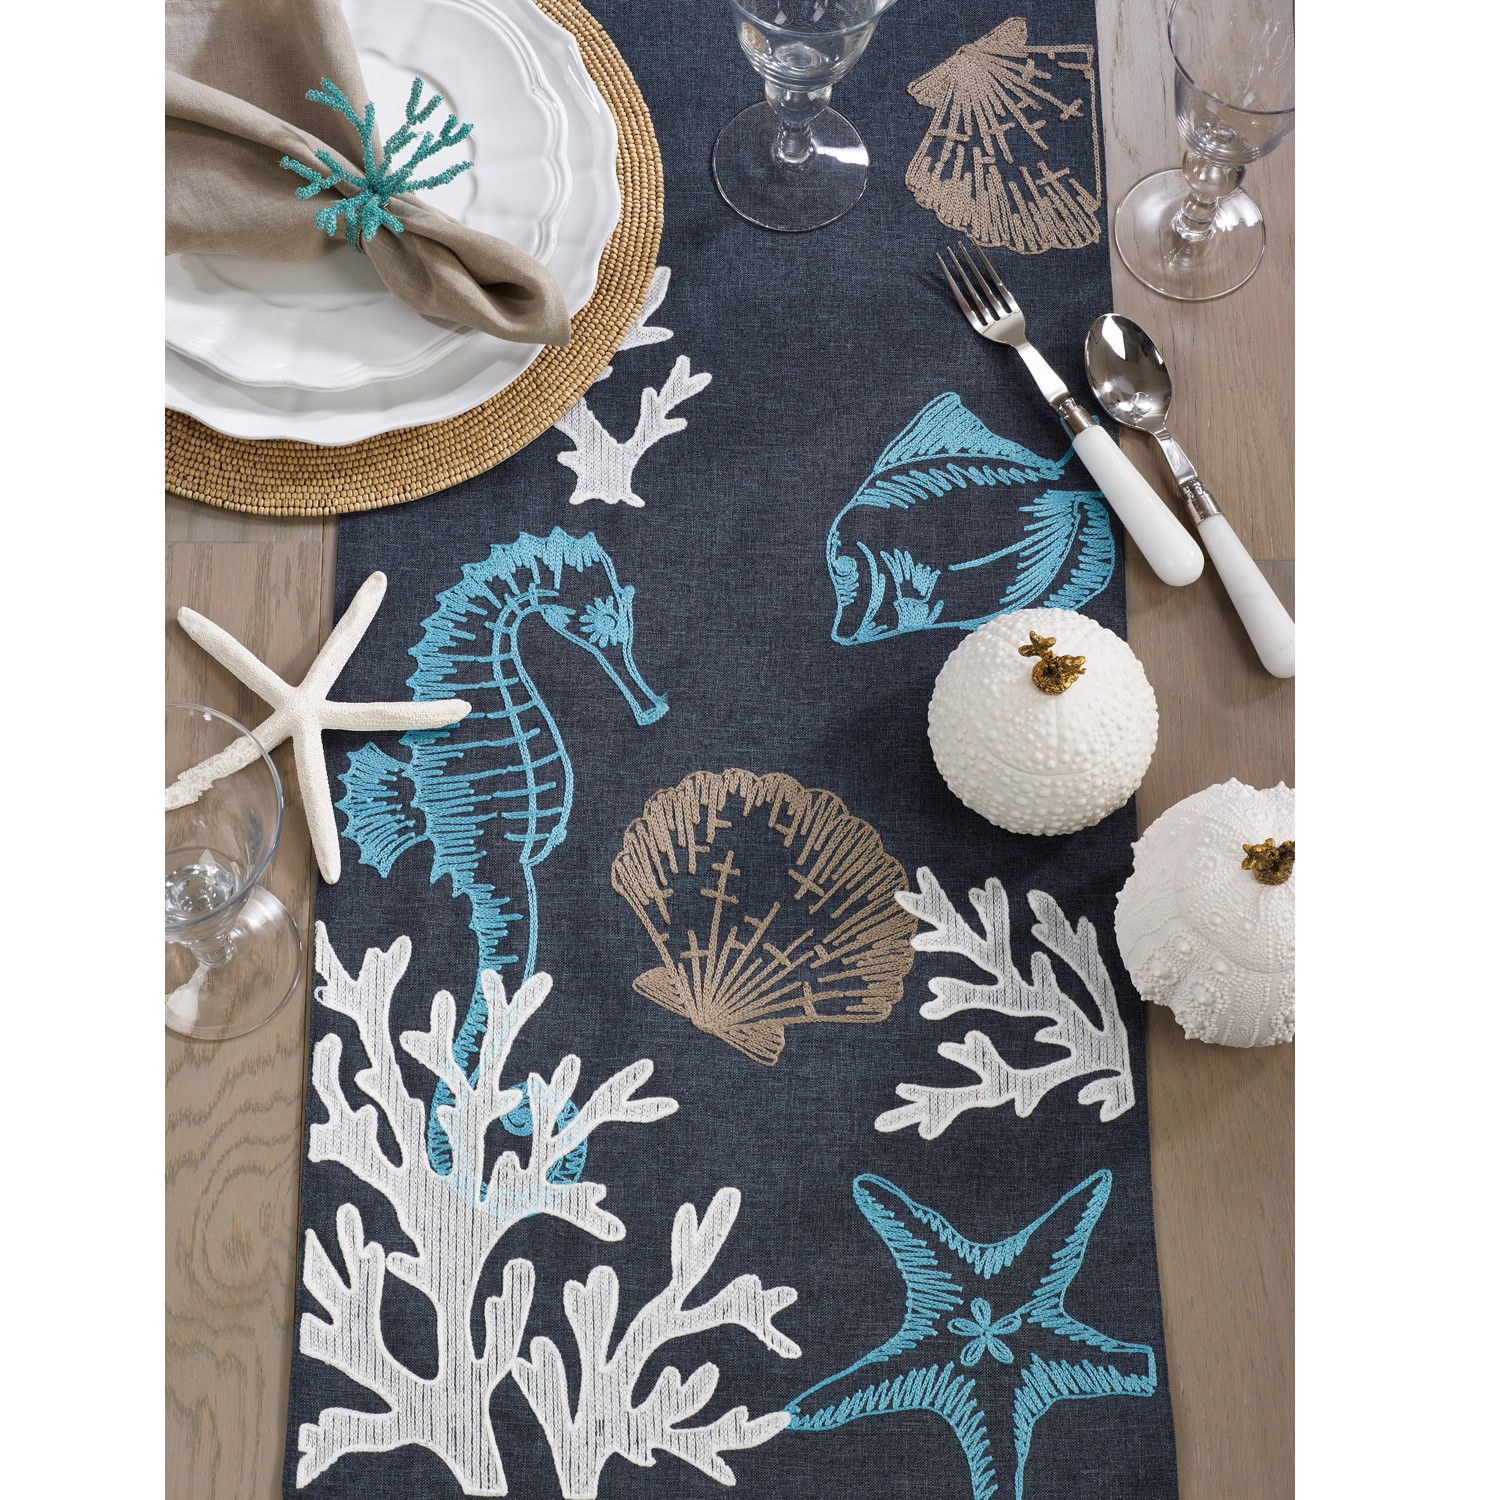 Embroidered Coastal Sea Life Table Runner – Salty Home